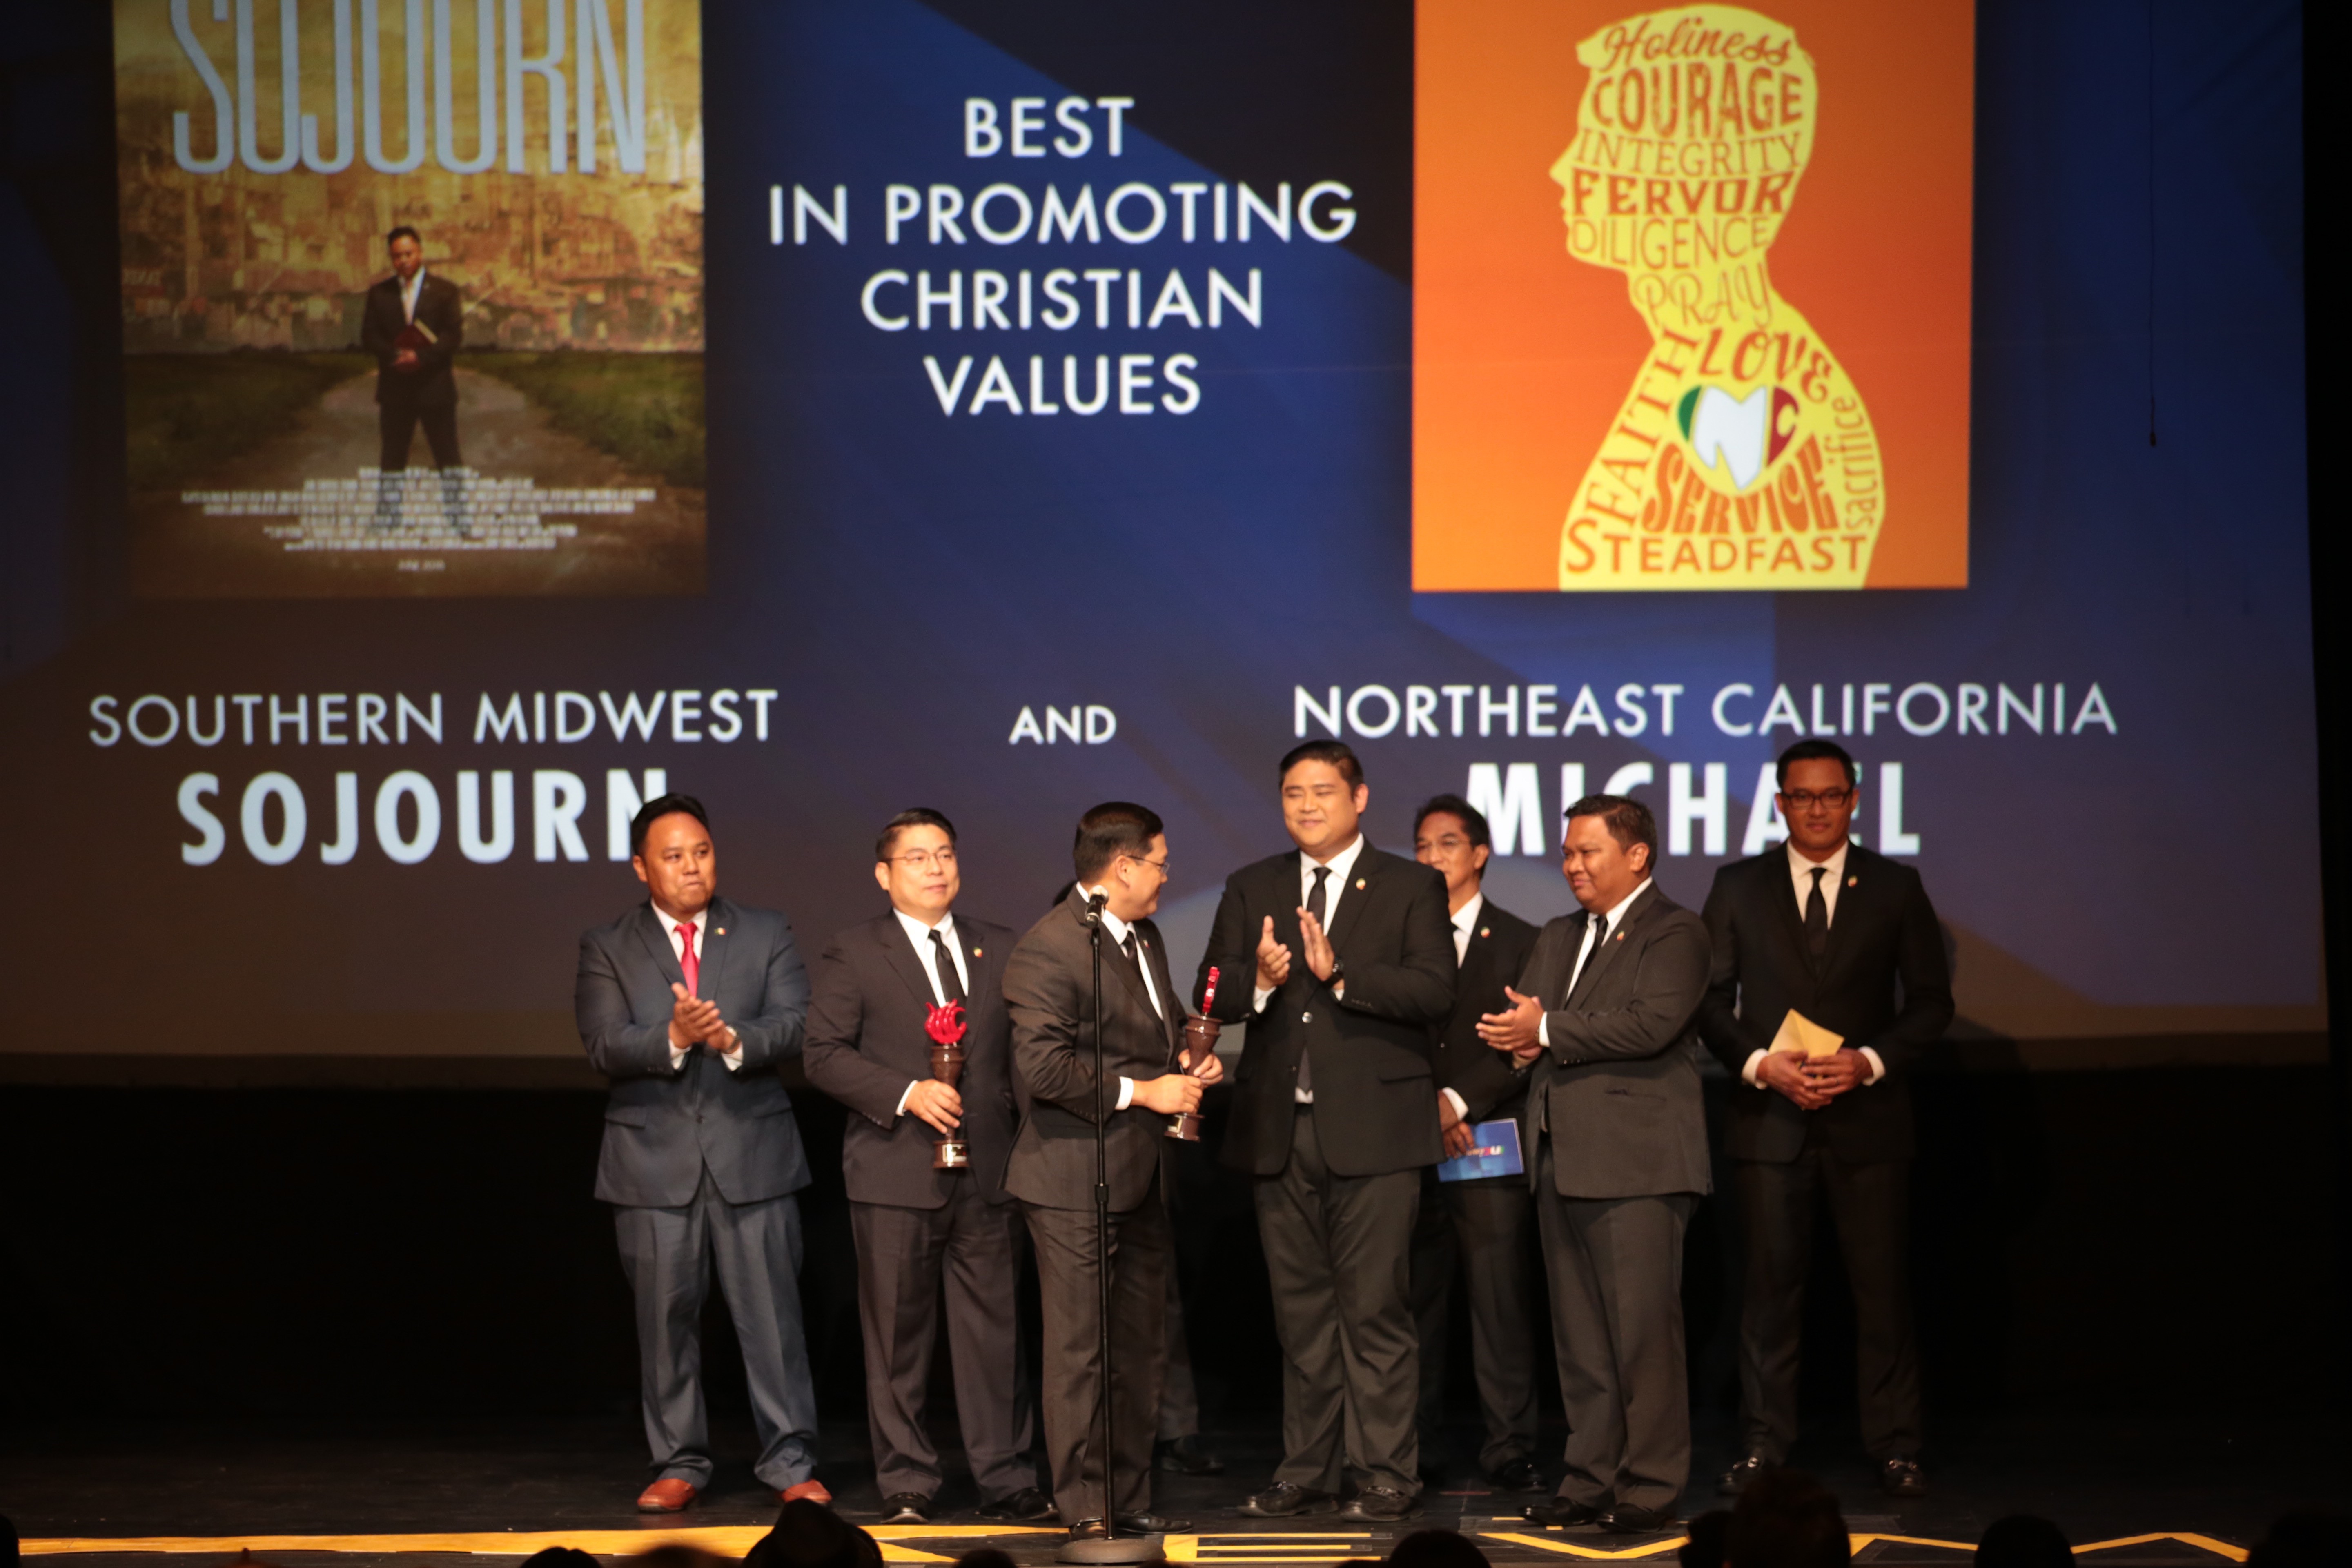 Film entries “Sojourn” and “Michael” accept award for Best in Promoting Christian Values. (Photo by: Joanne Blanco) 